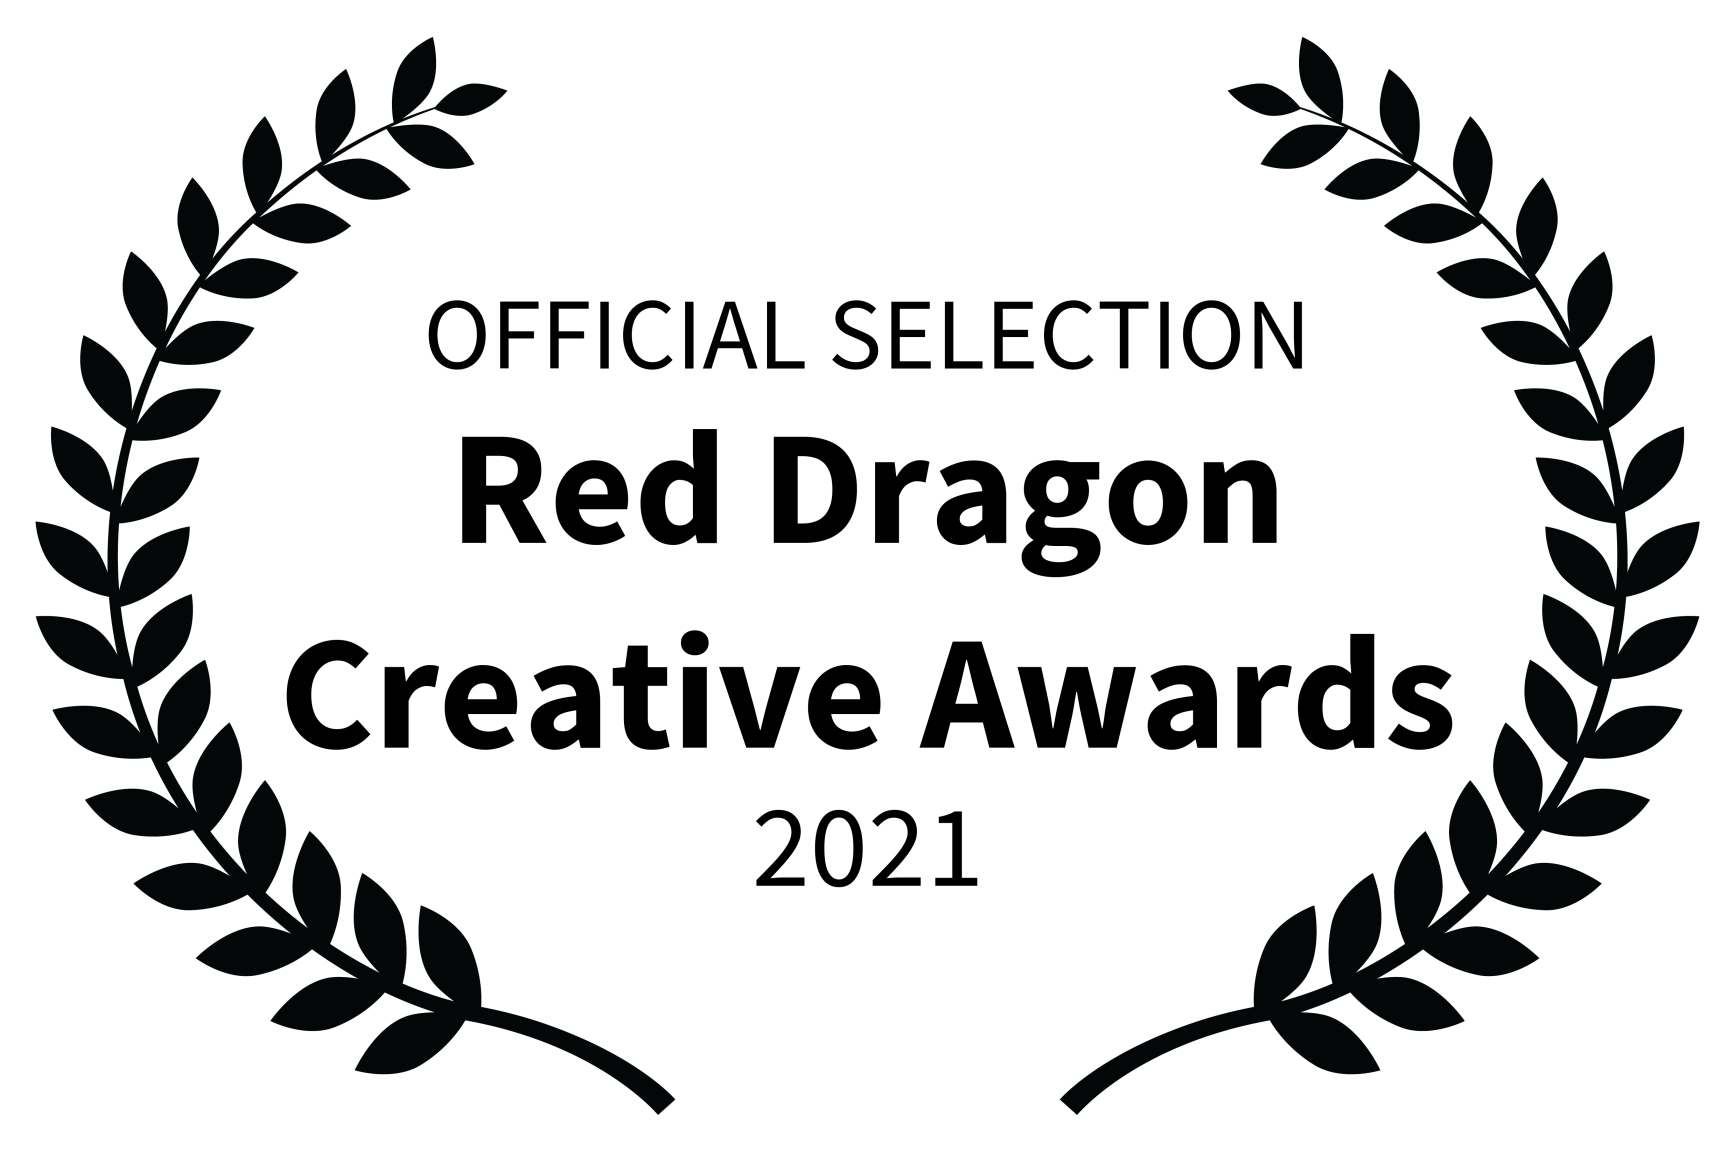 OFFICIAL SELECTION - Red Dragon Creative Awards - 2021